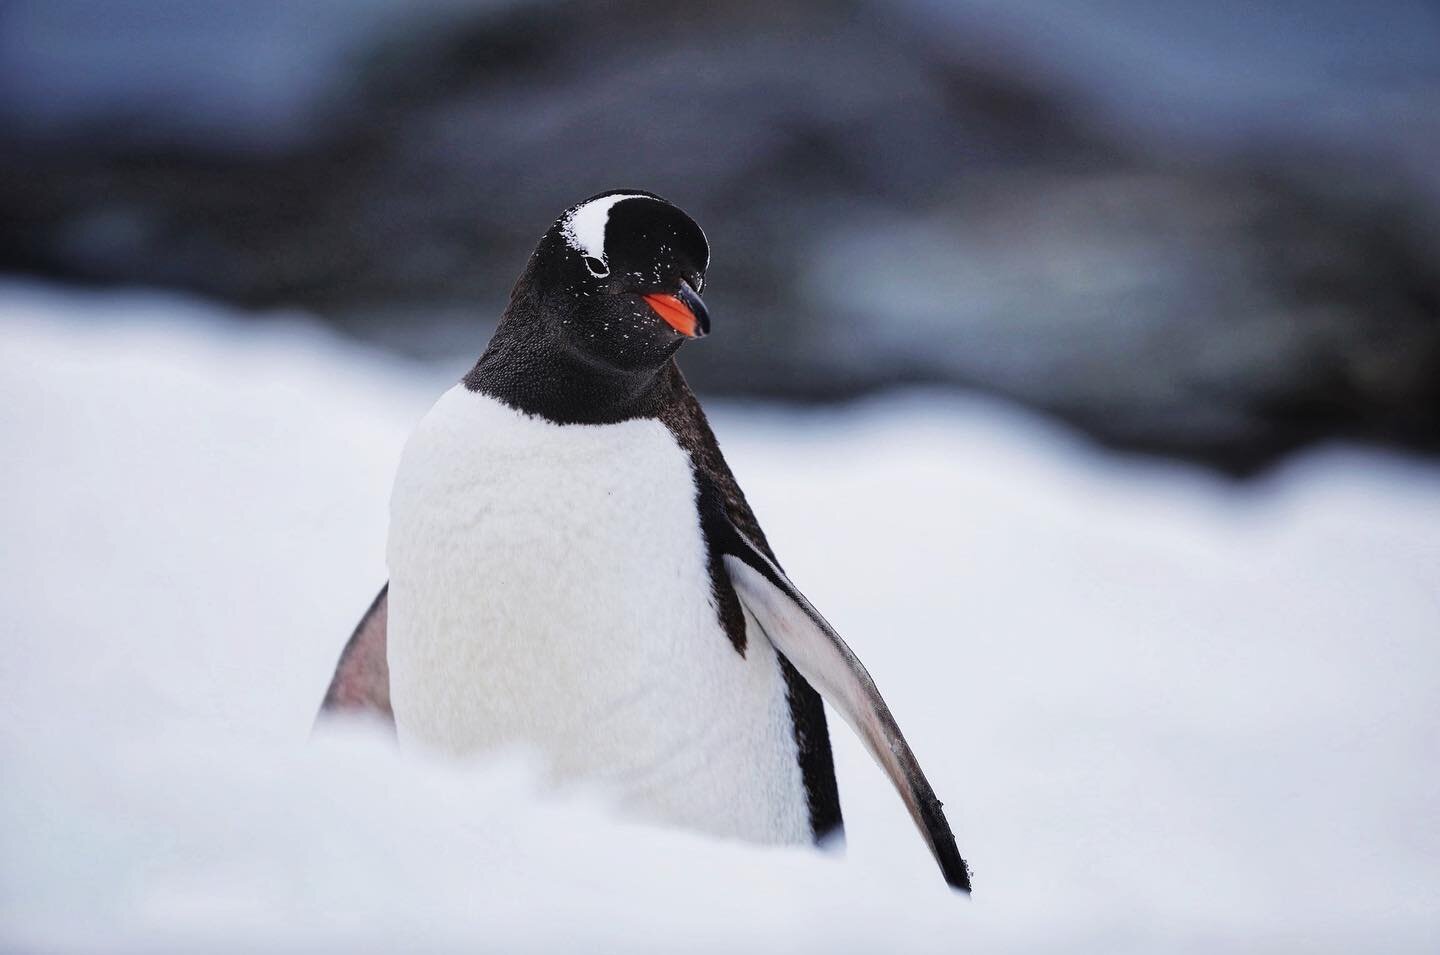 Thinking back to this staring contest with a curious Gentoo Penguin along the edge of the Antarctic peninsula.